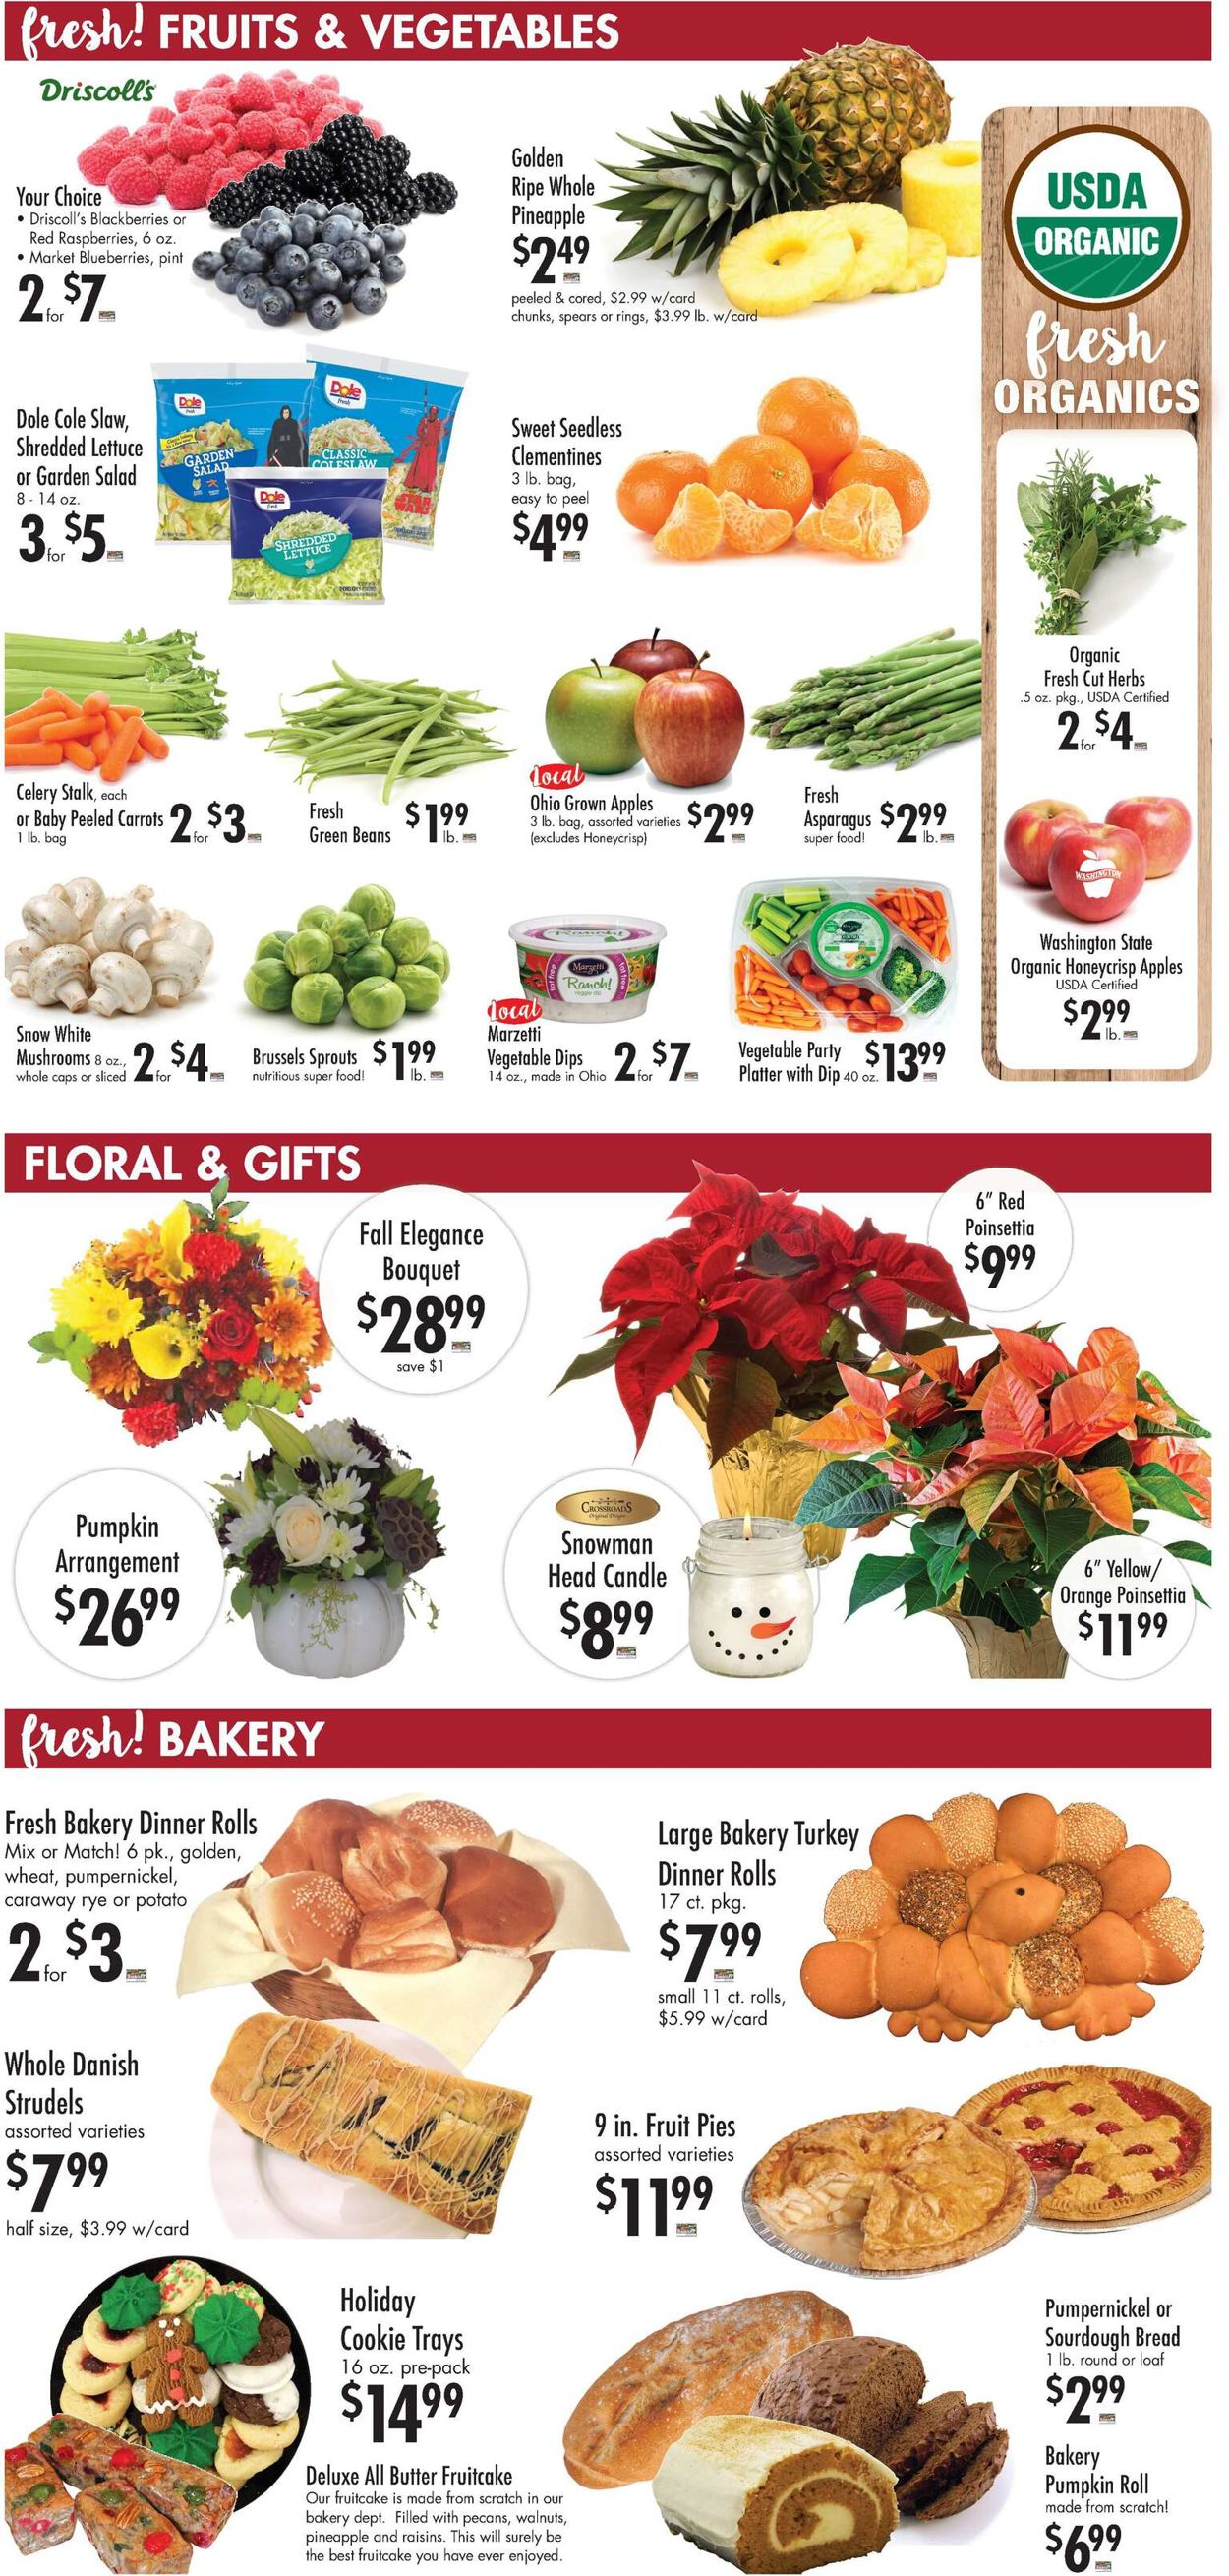 Buehler's Fresh Foods Ad from 11/10/2021